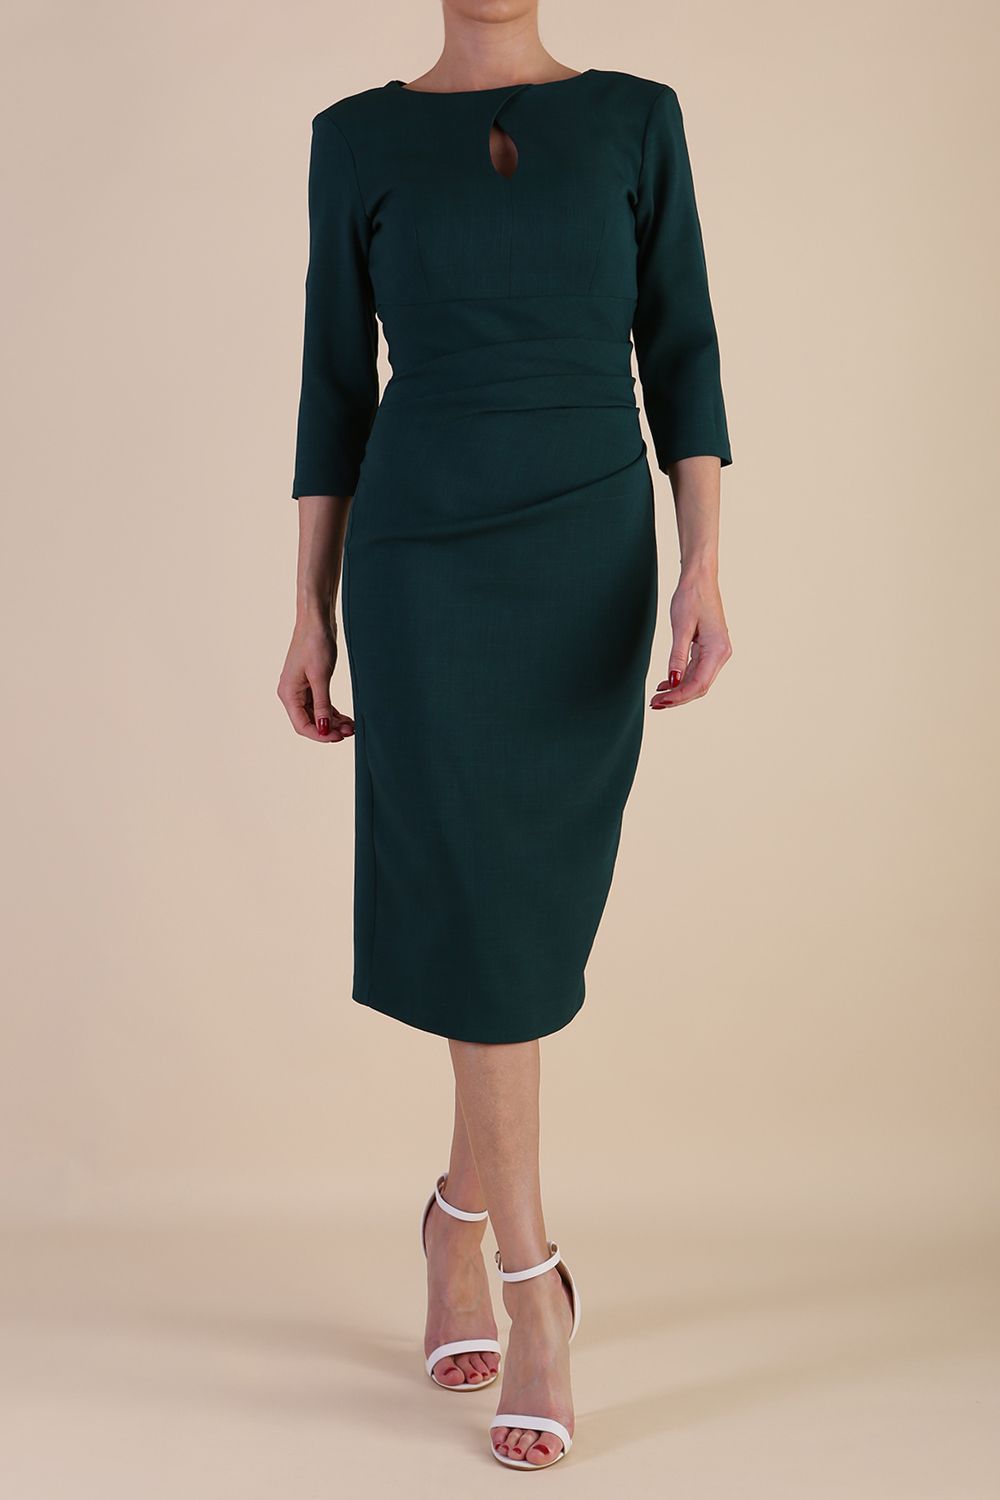 model is wearing the Diva Catwalk Ubrique pencil dress with Long sleeves and keyhole detail in Forest Green fabric colour